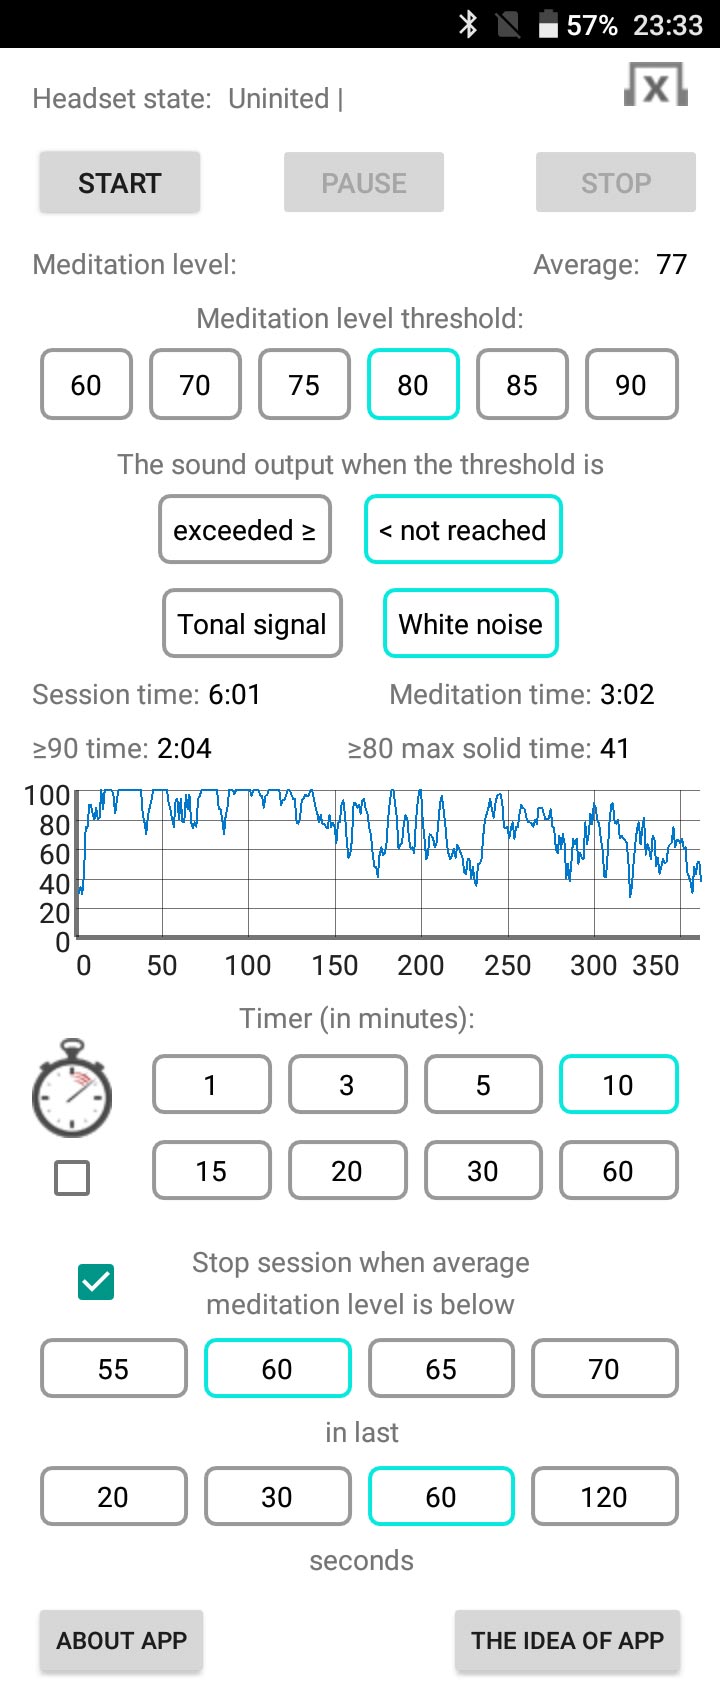 Screenshot of the free application "EEG Meditation" for Android for the NeuroSky MindWave Mobile neuroheadset